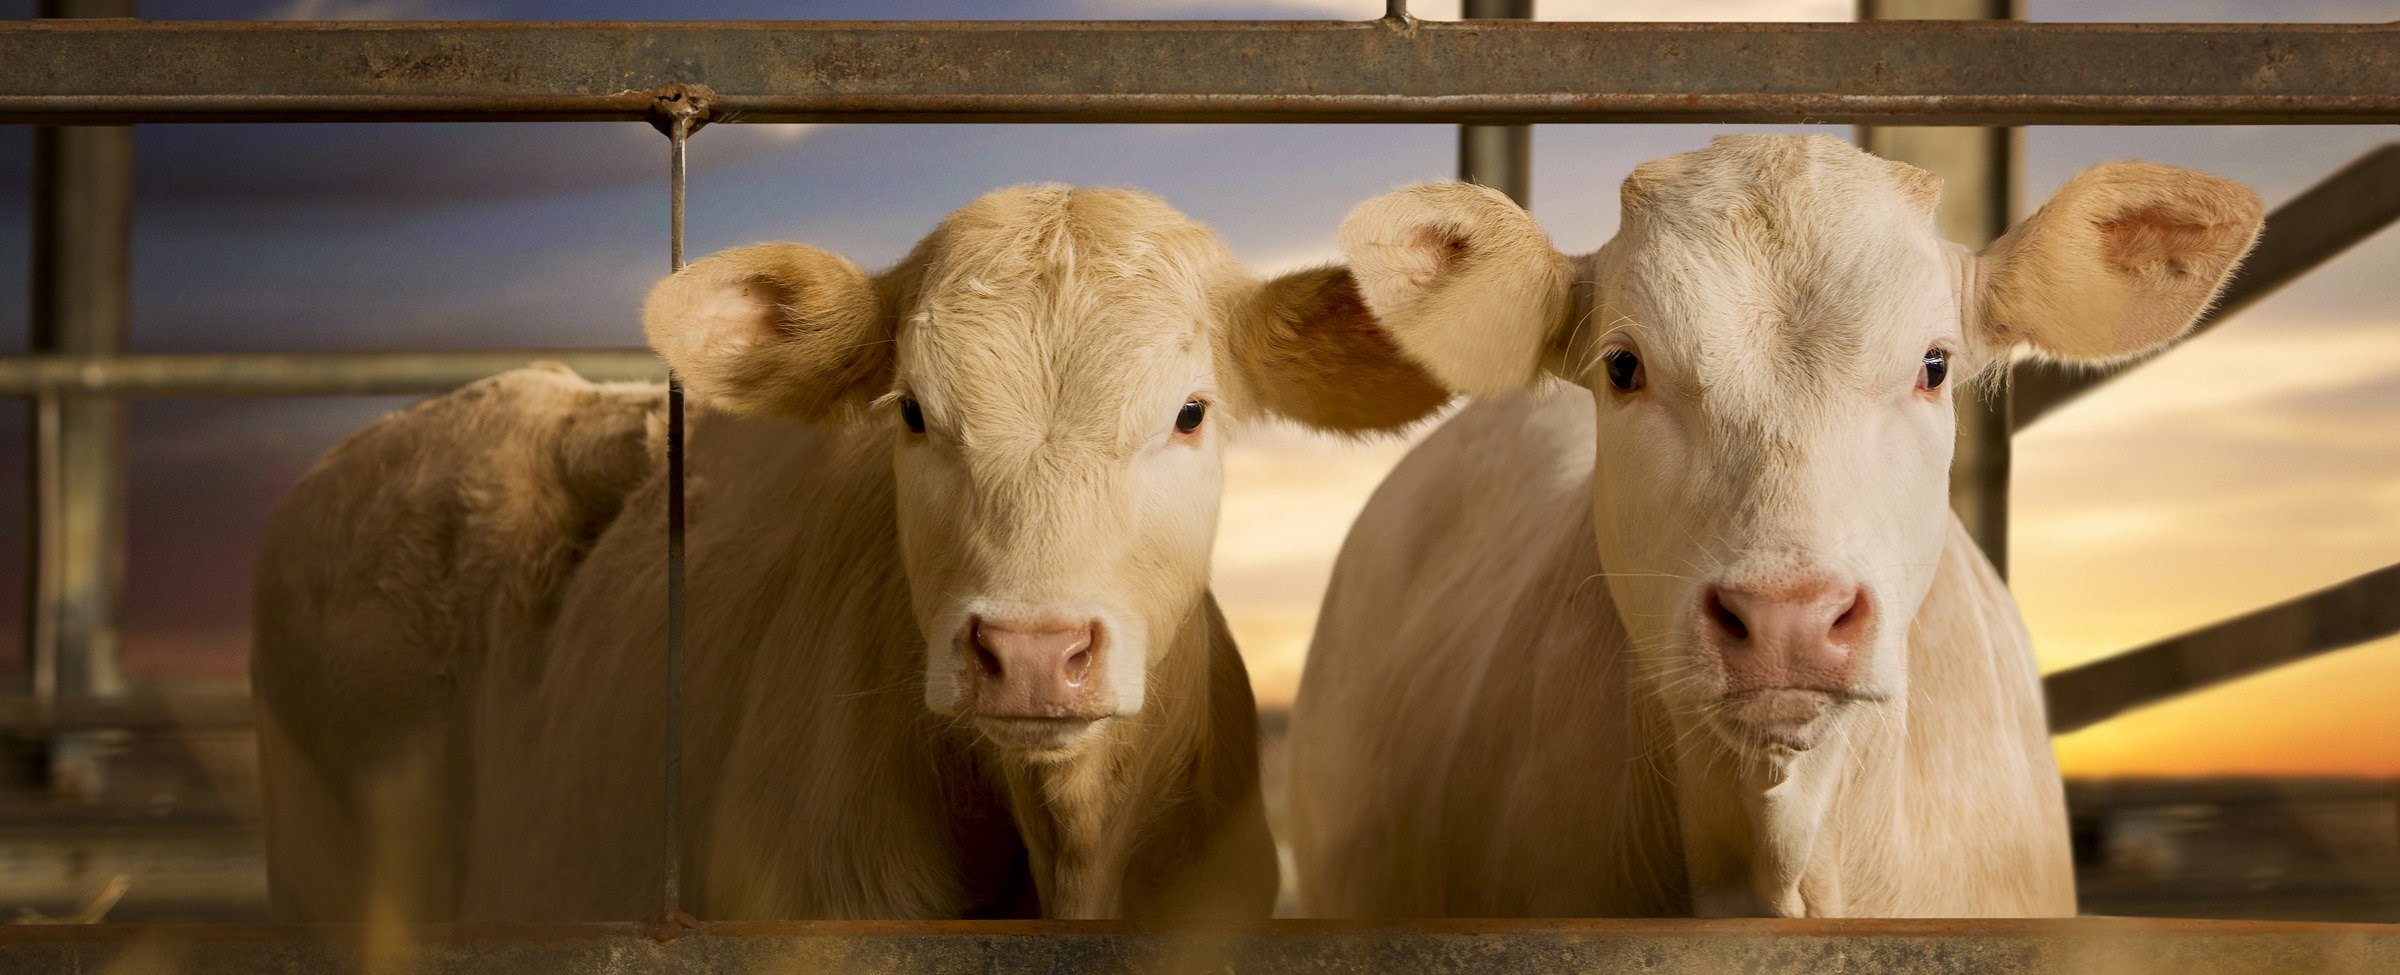 Two Charolais growers in a pen looking at the camera.